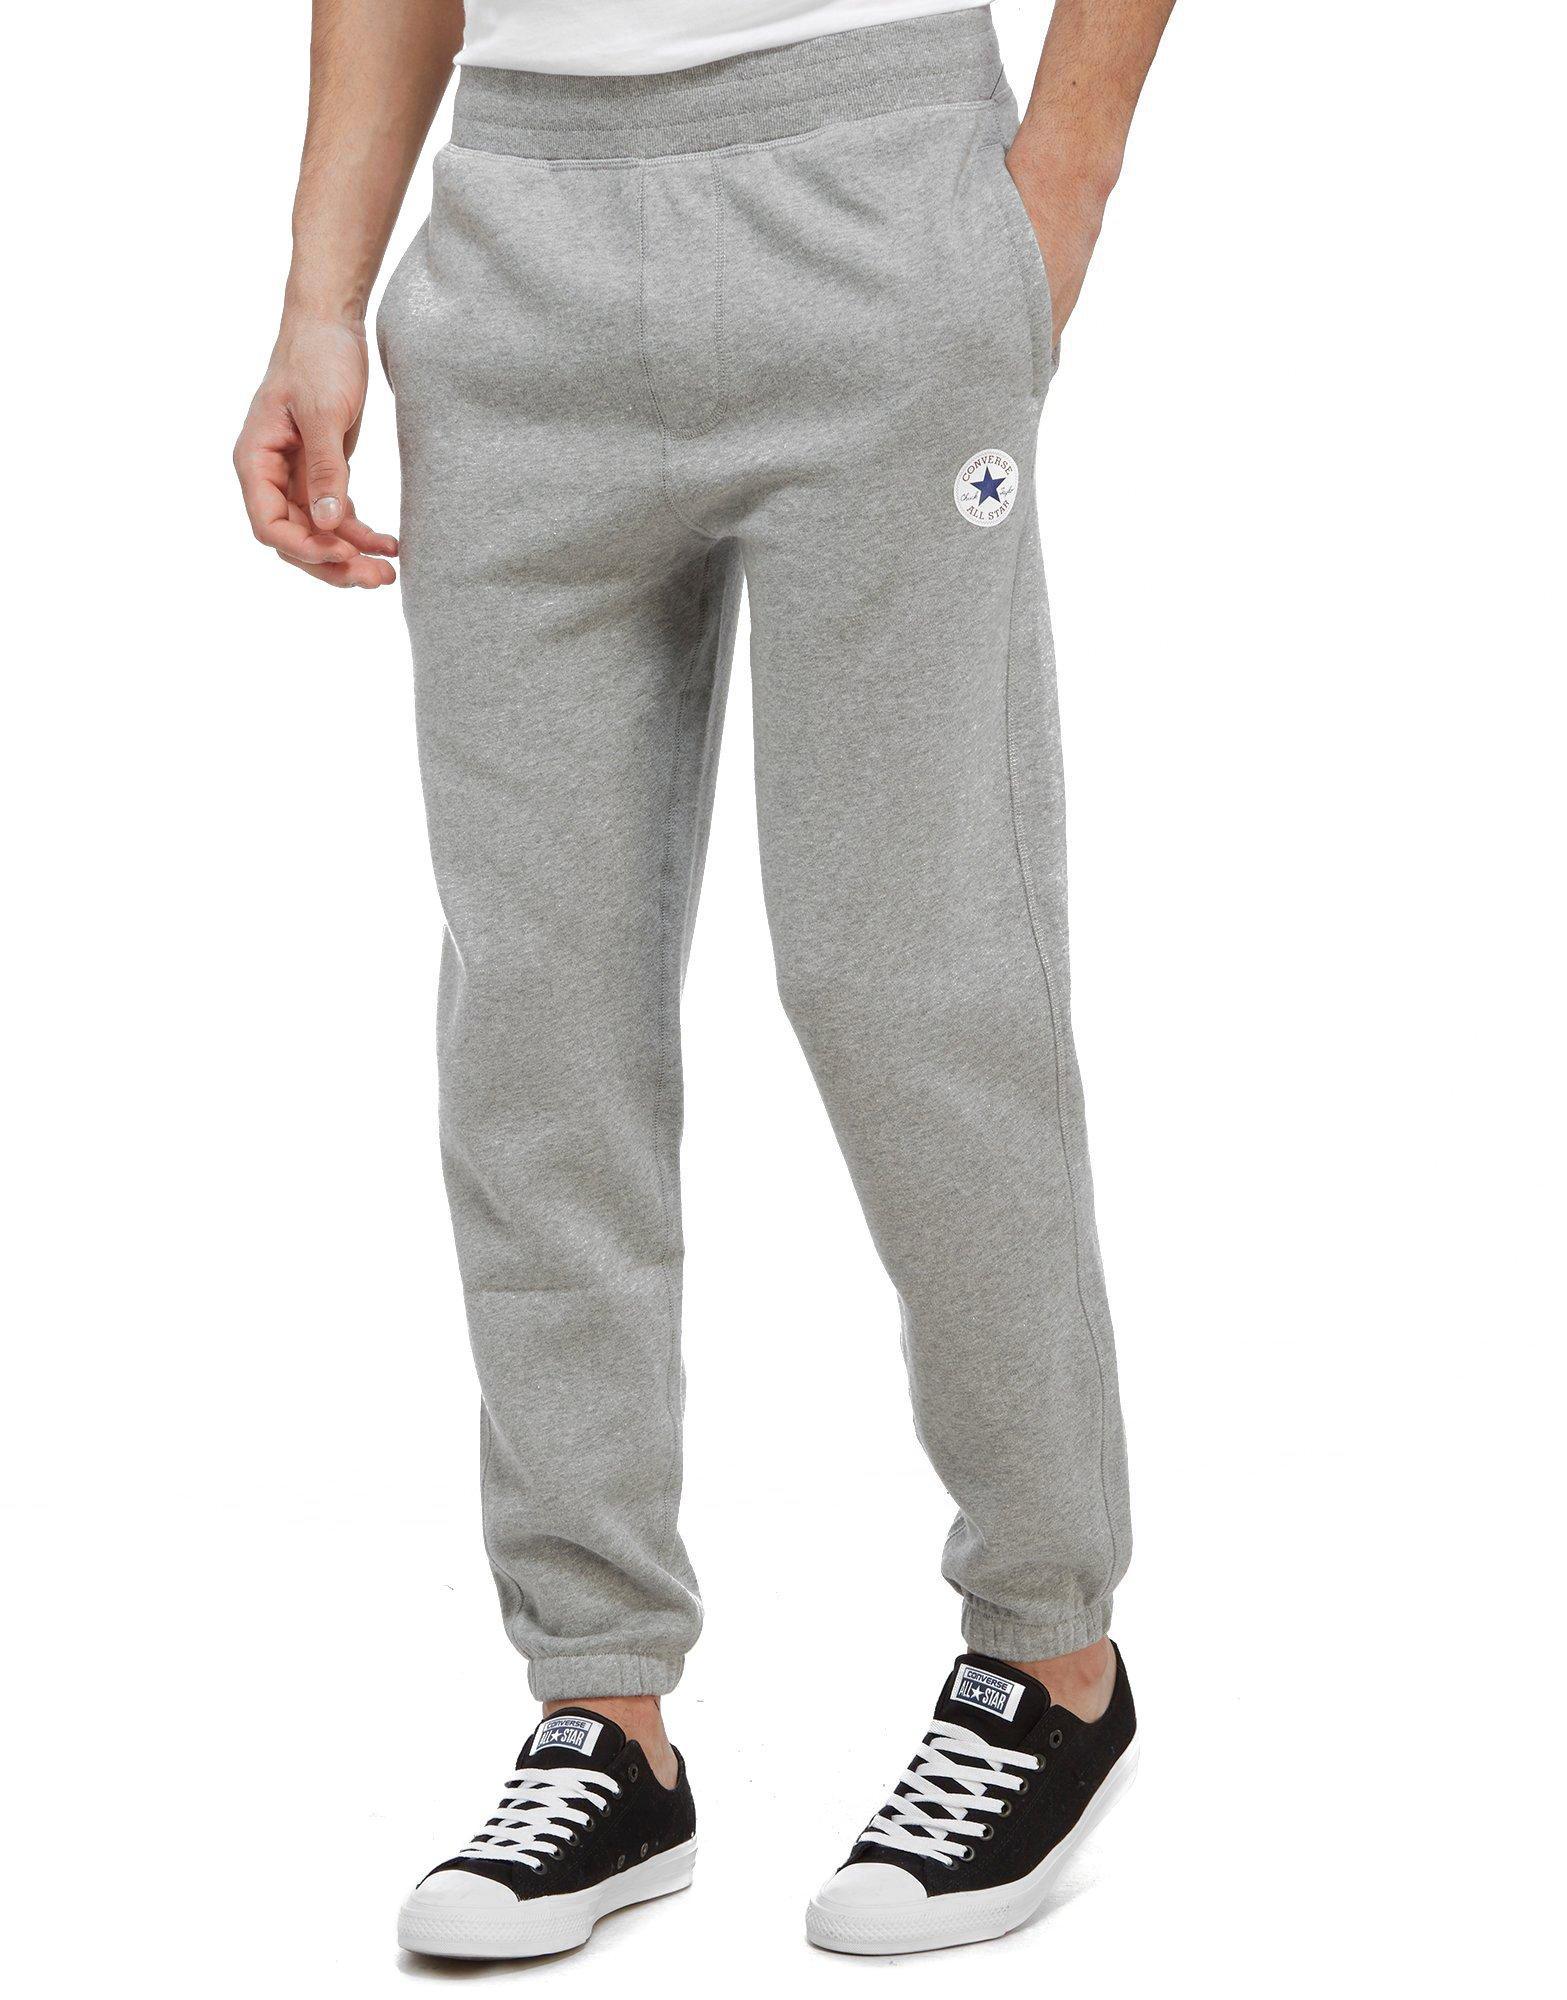 converse all star track pants